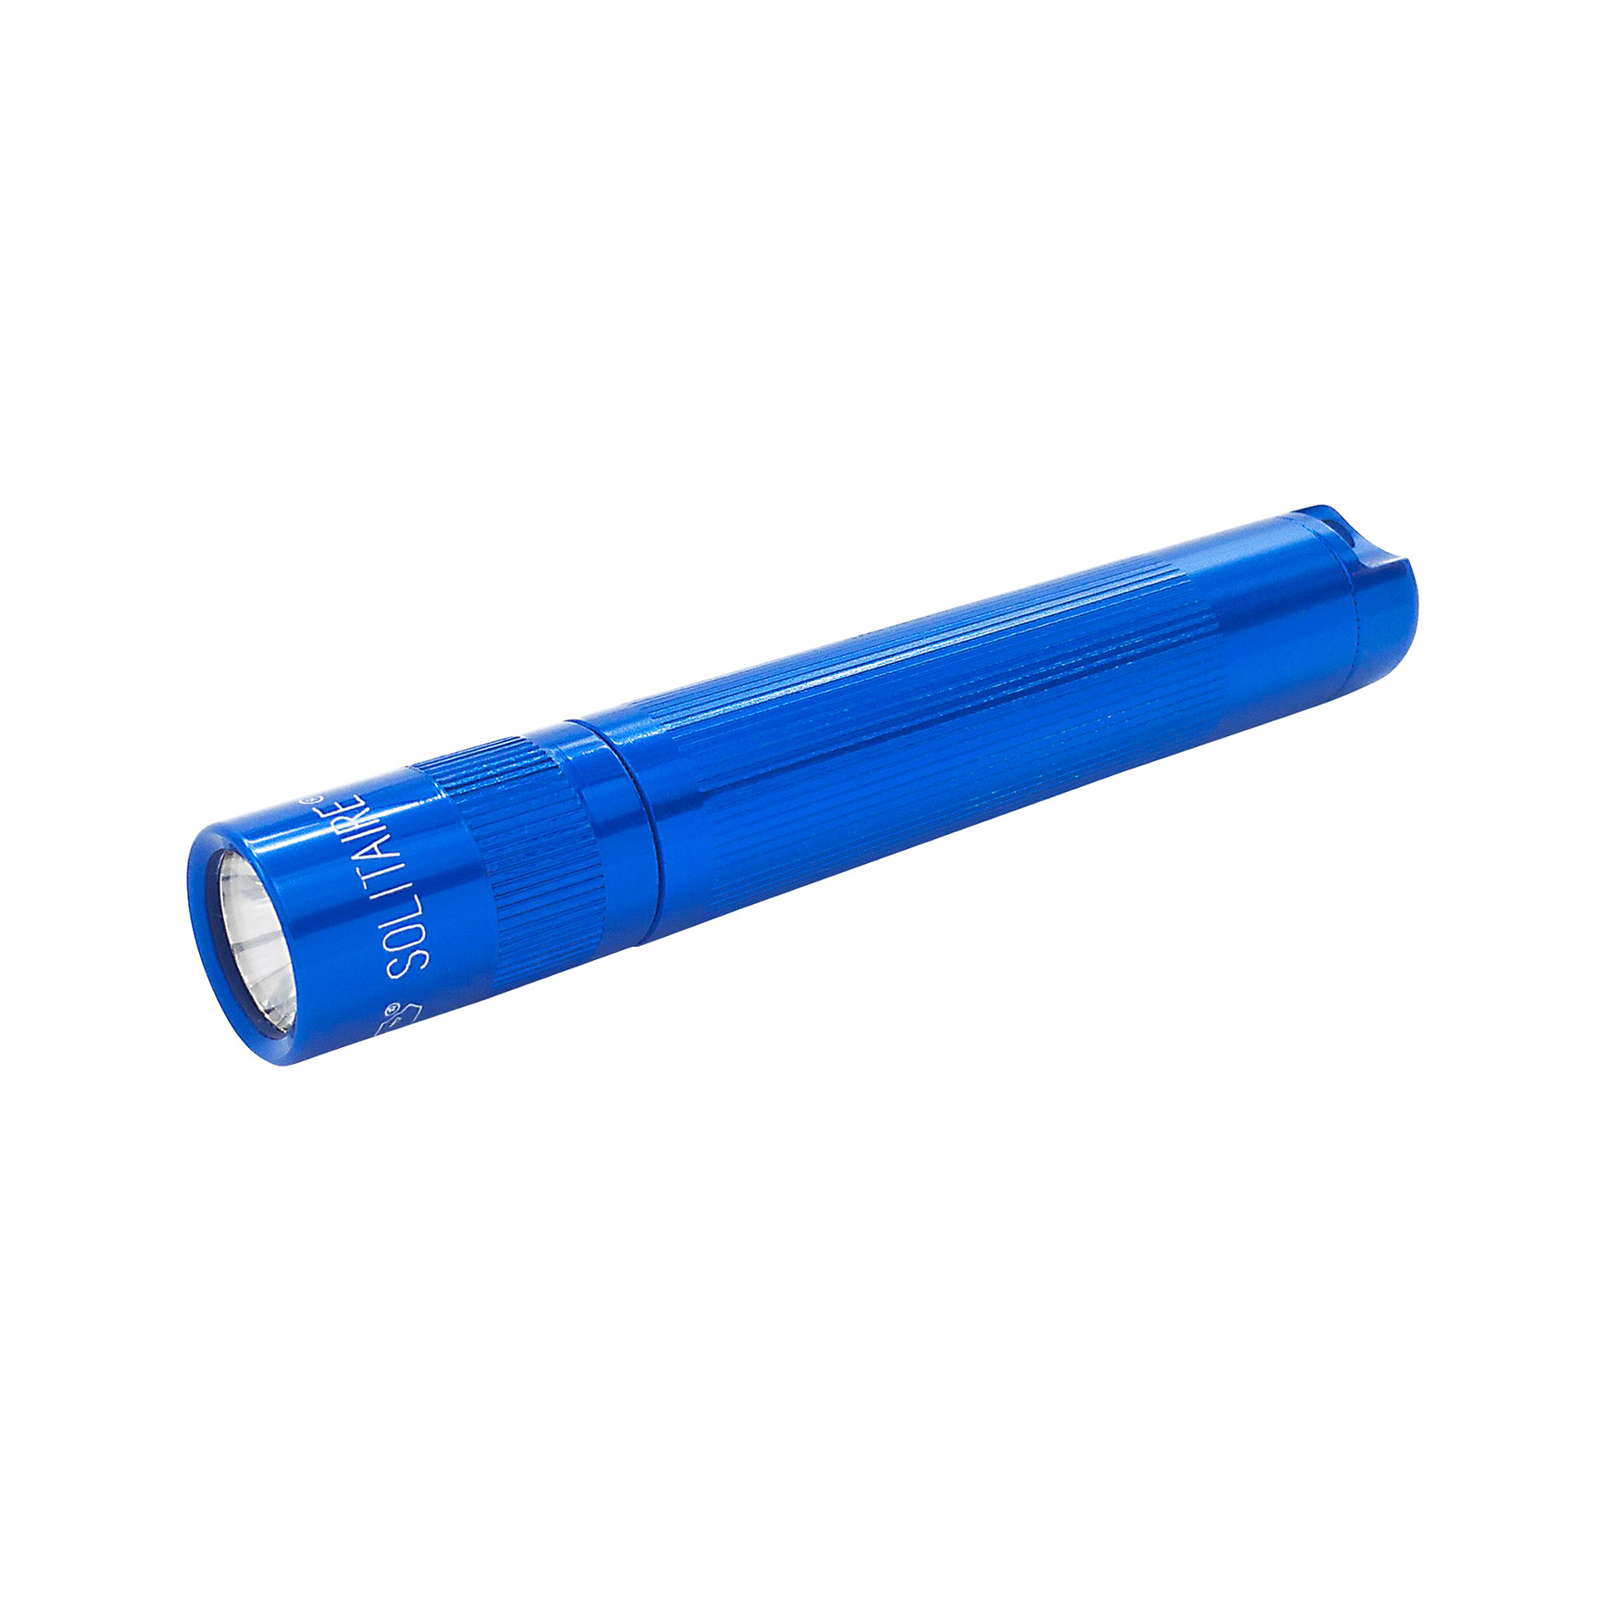 Maglite Xenon-lommelykt Solitaire 1-Cell AAA, eske, blå